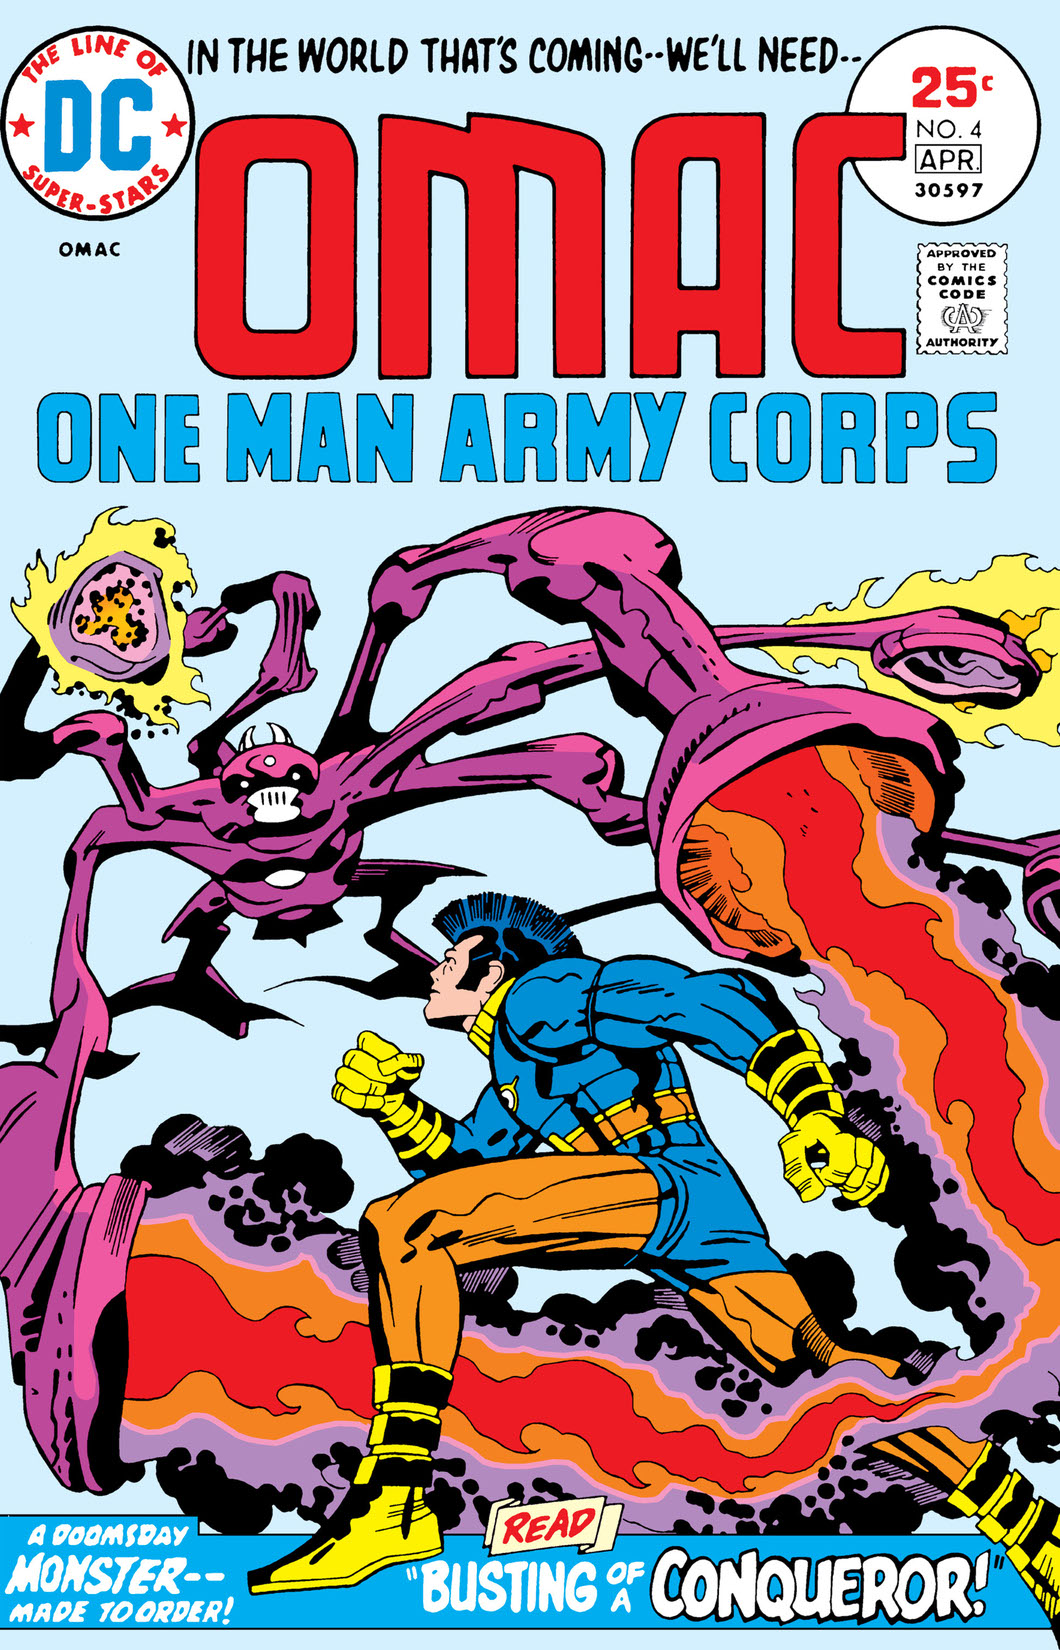 O.M.A.C. (1974-) #4 preview images